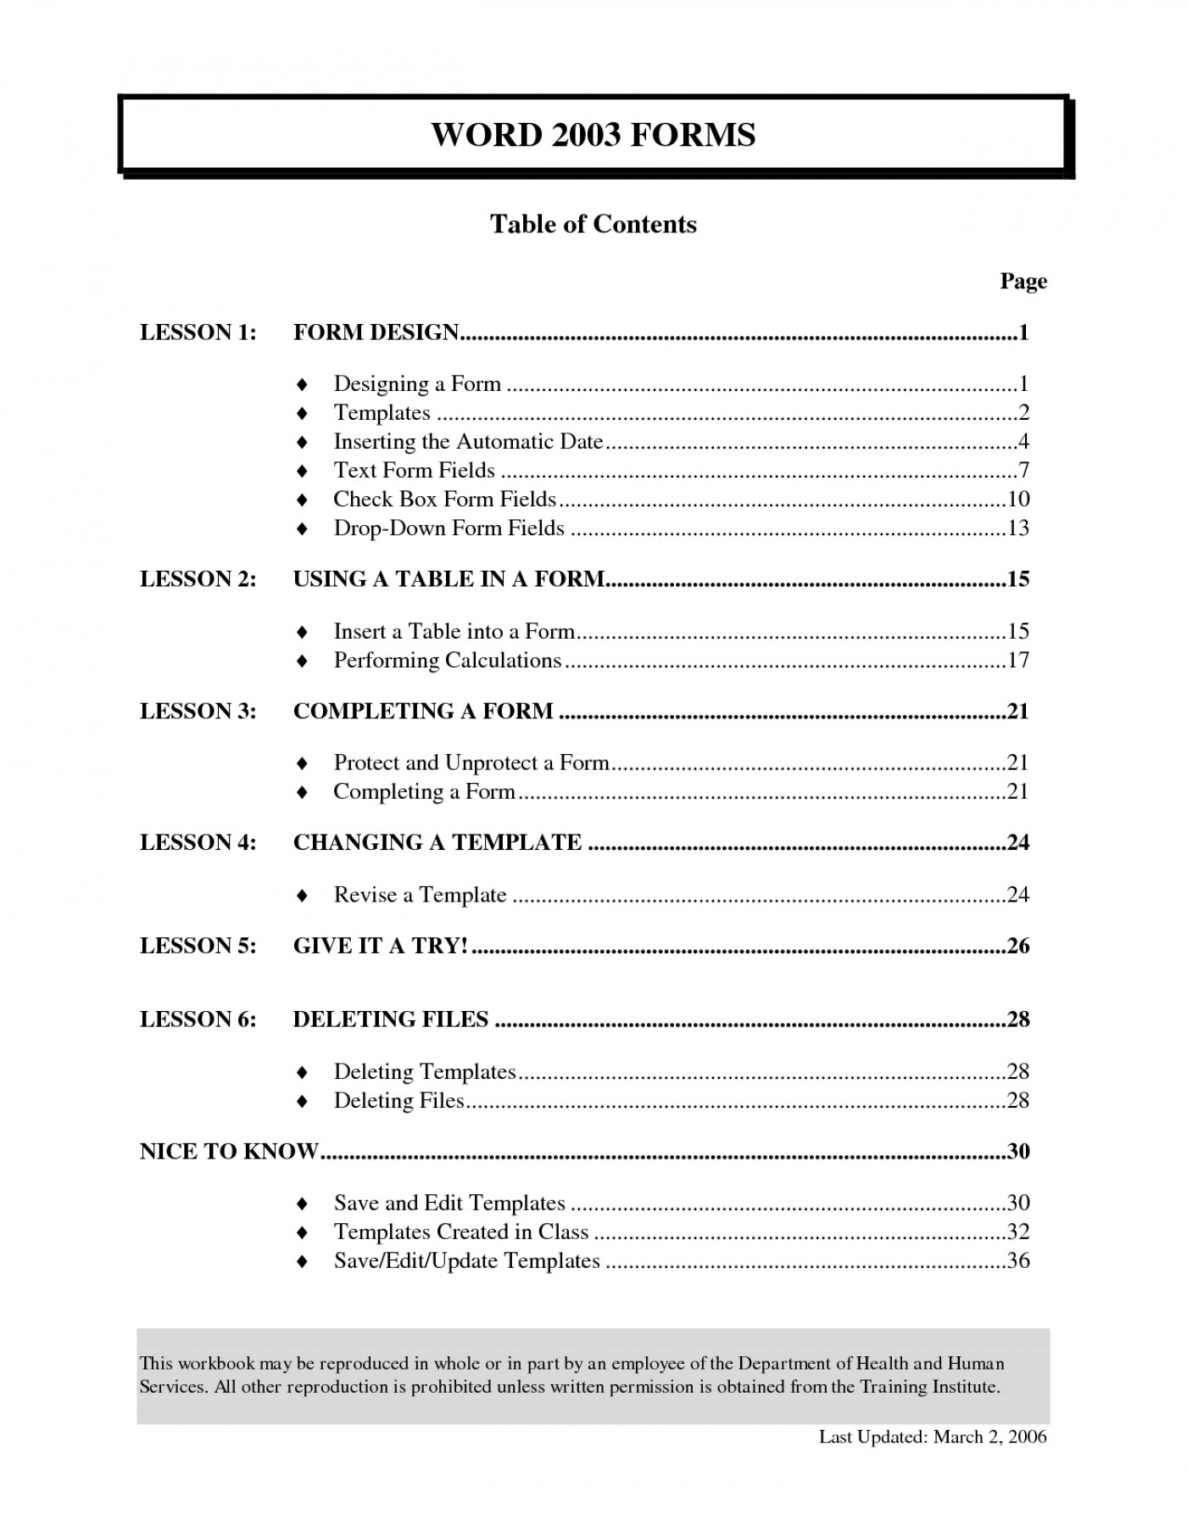 Format manual table of contents word